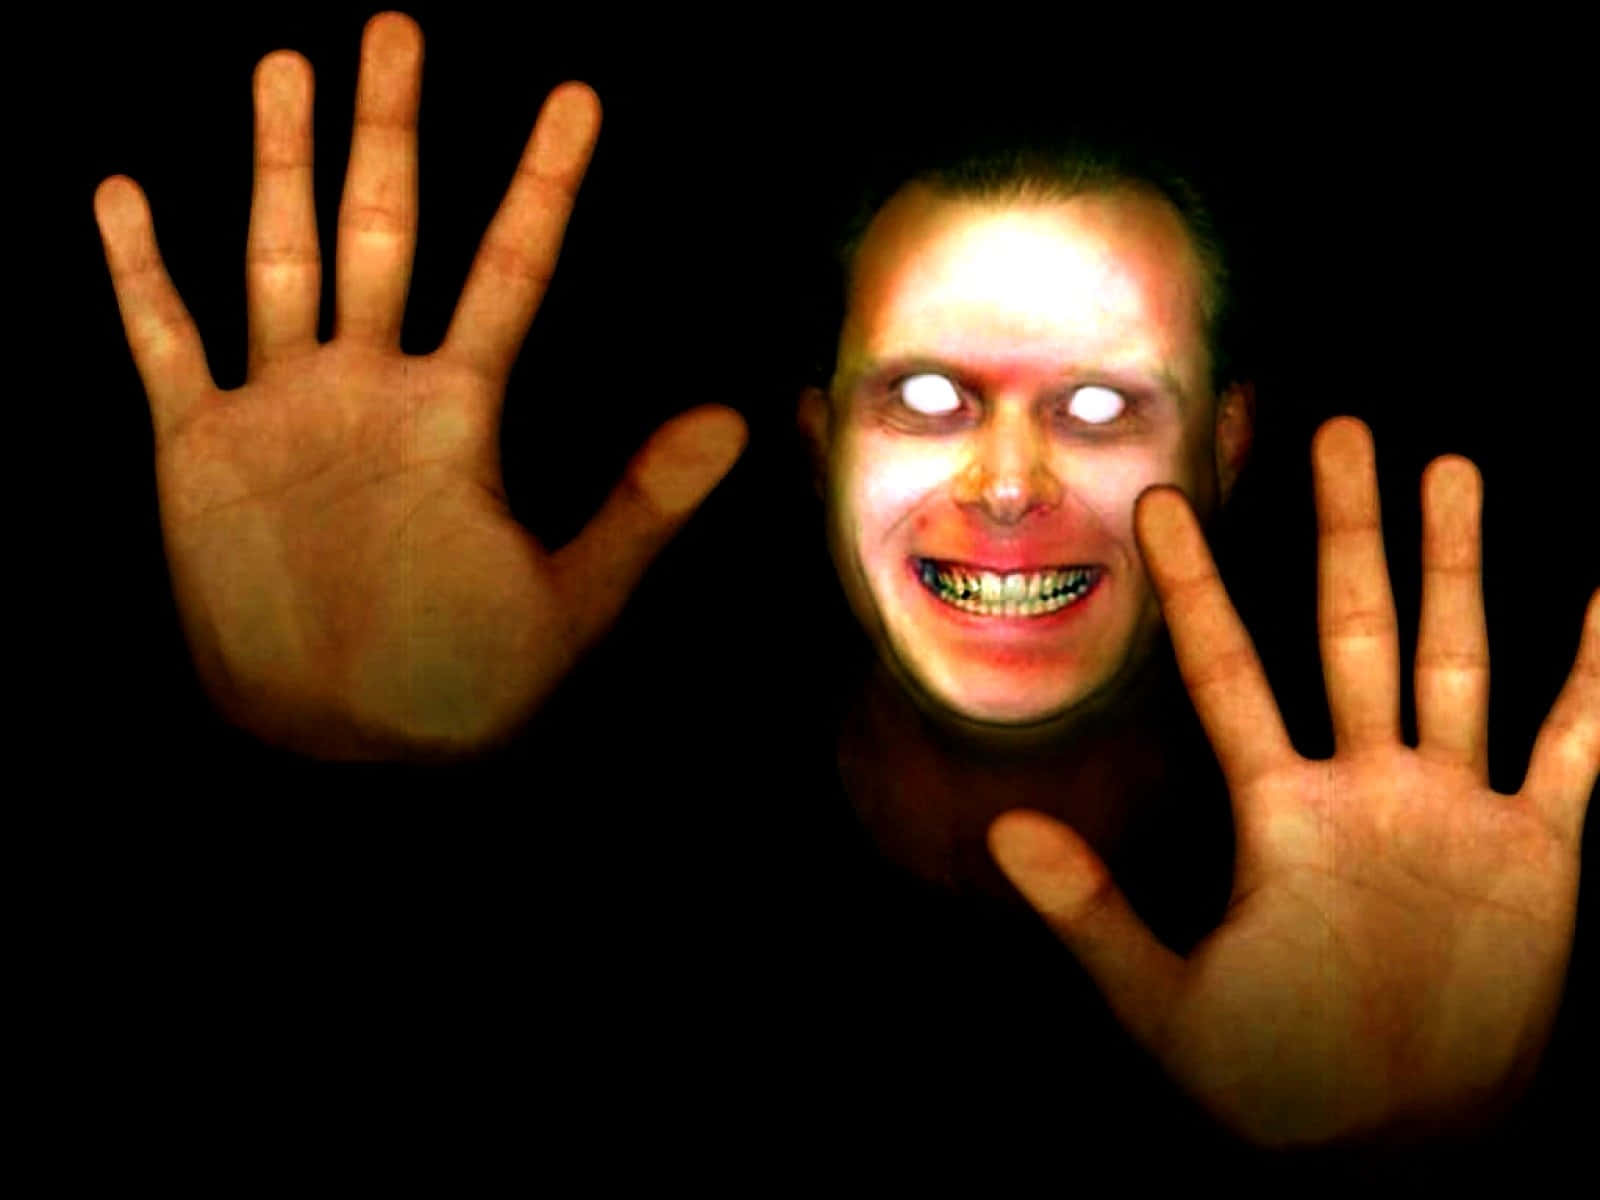 Creepy_ Smiling_ Face_and_ Hands Wallpaper